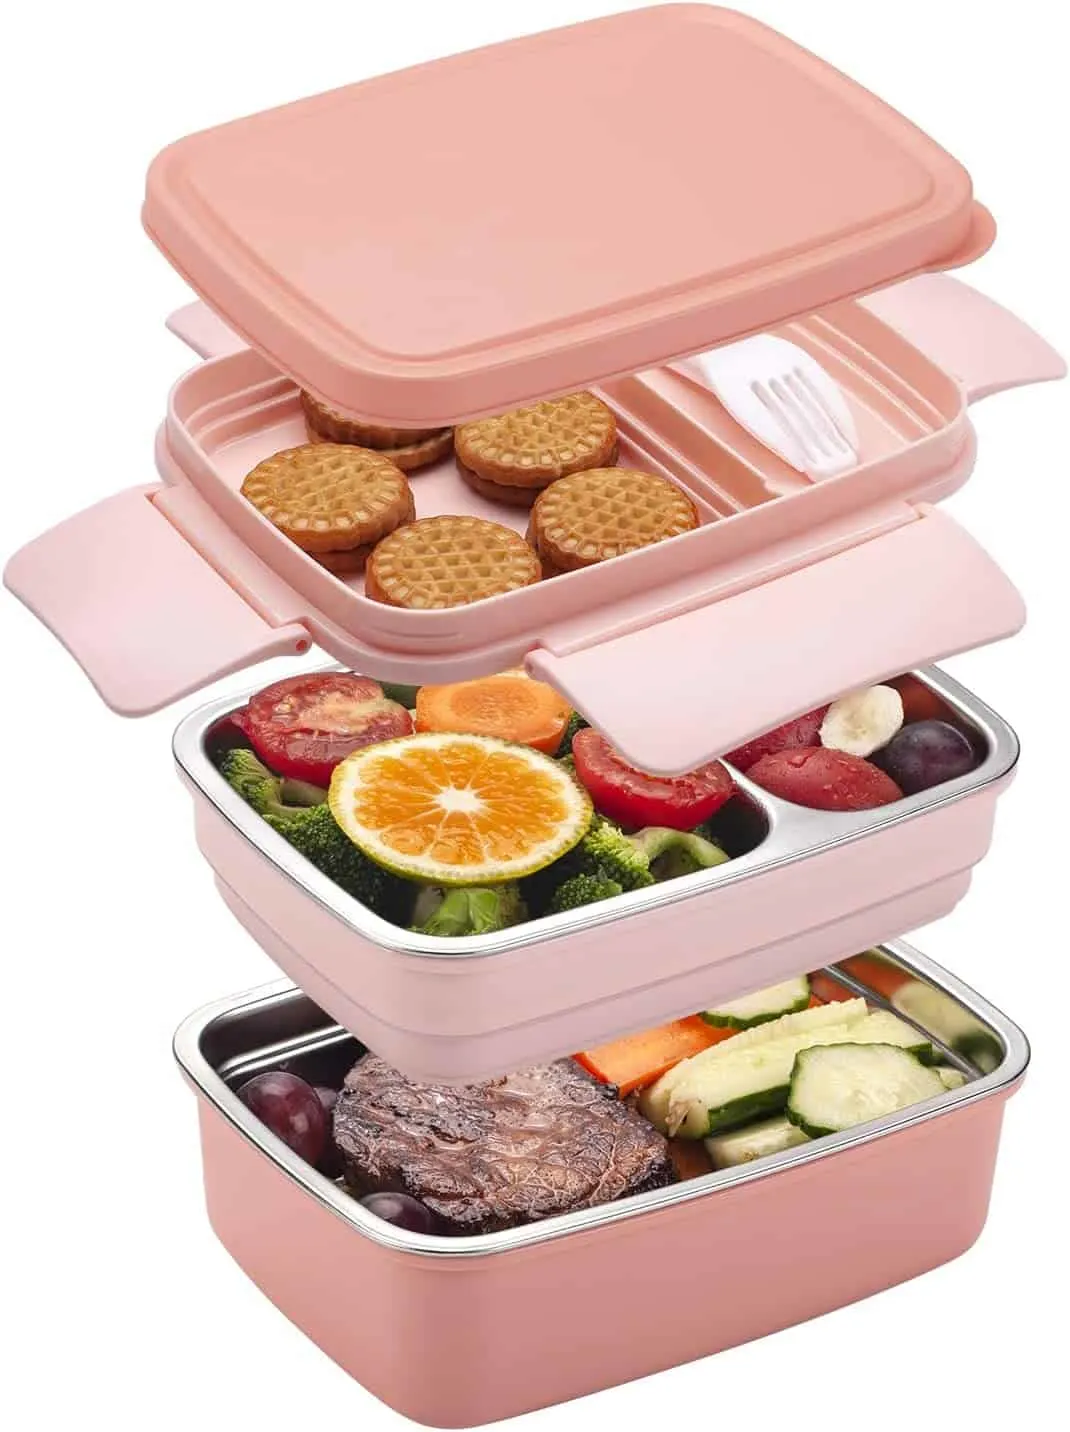 WEESPROUT Large Stainless Steel Bento Box With Silicone Sleeve